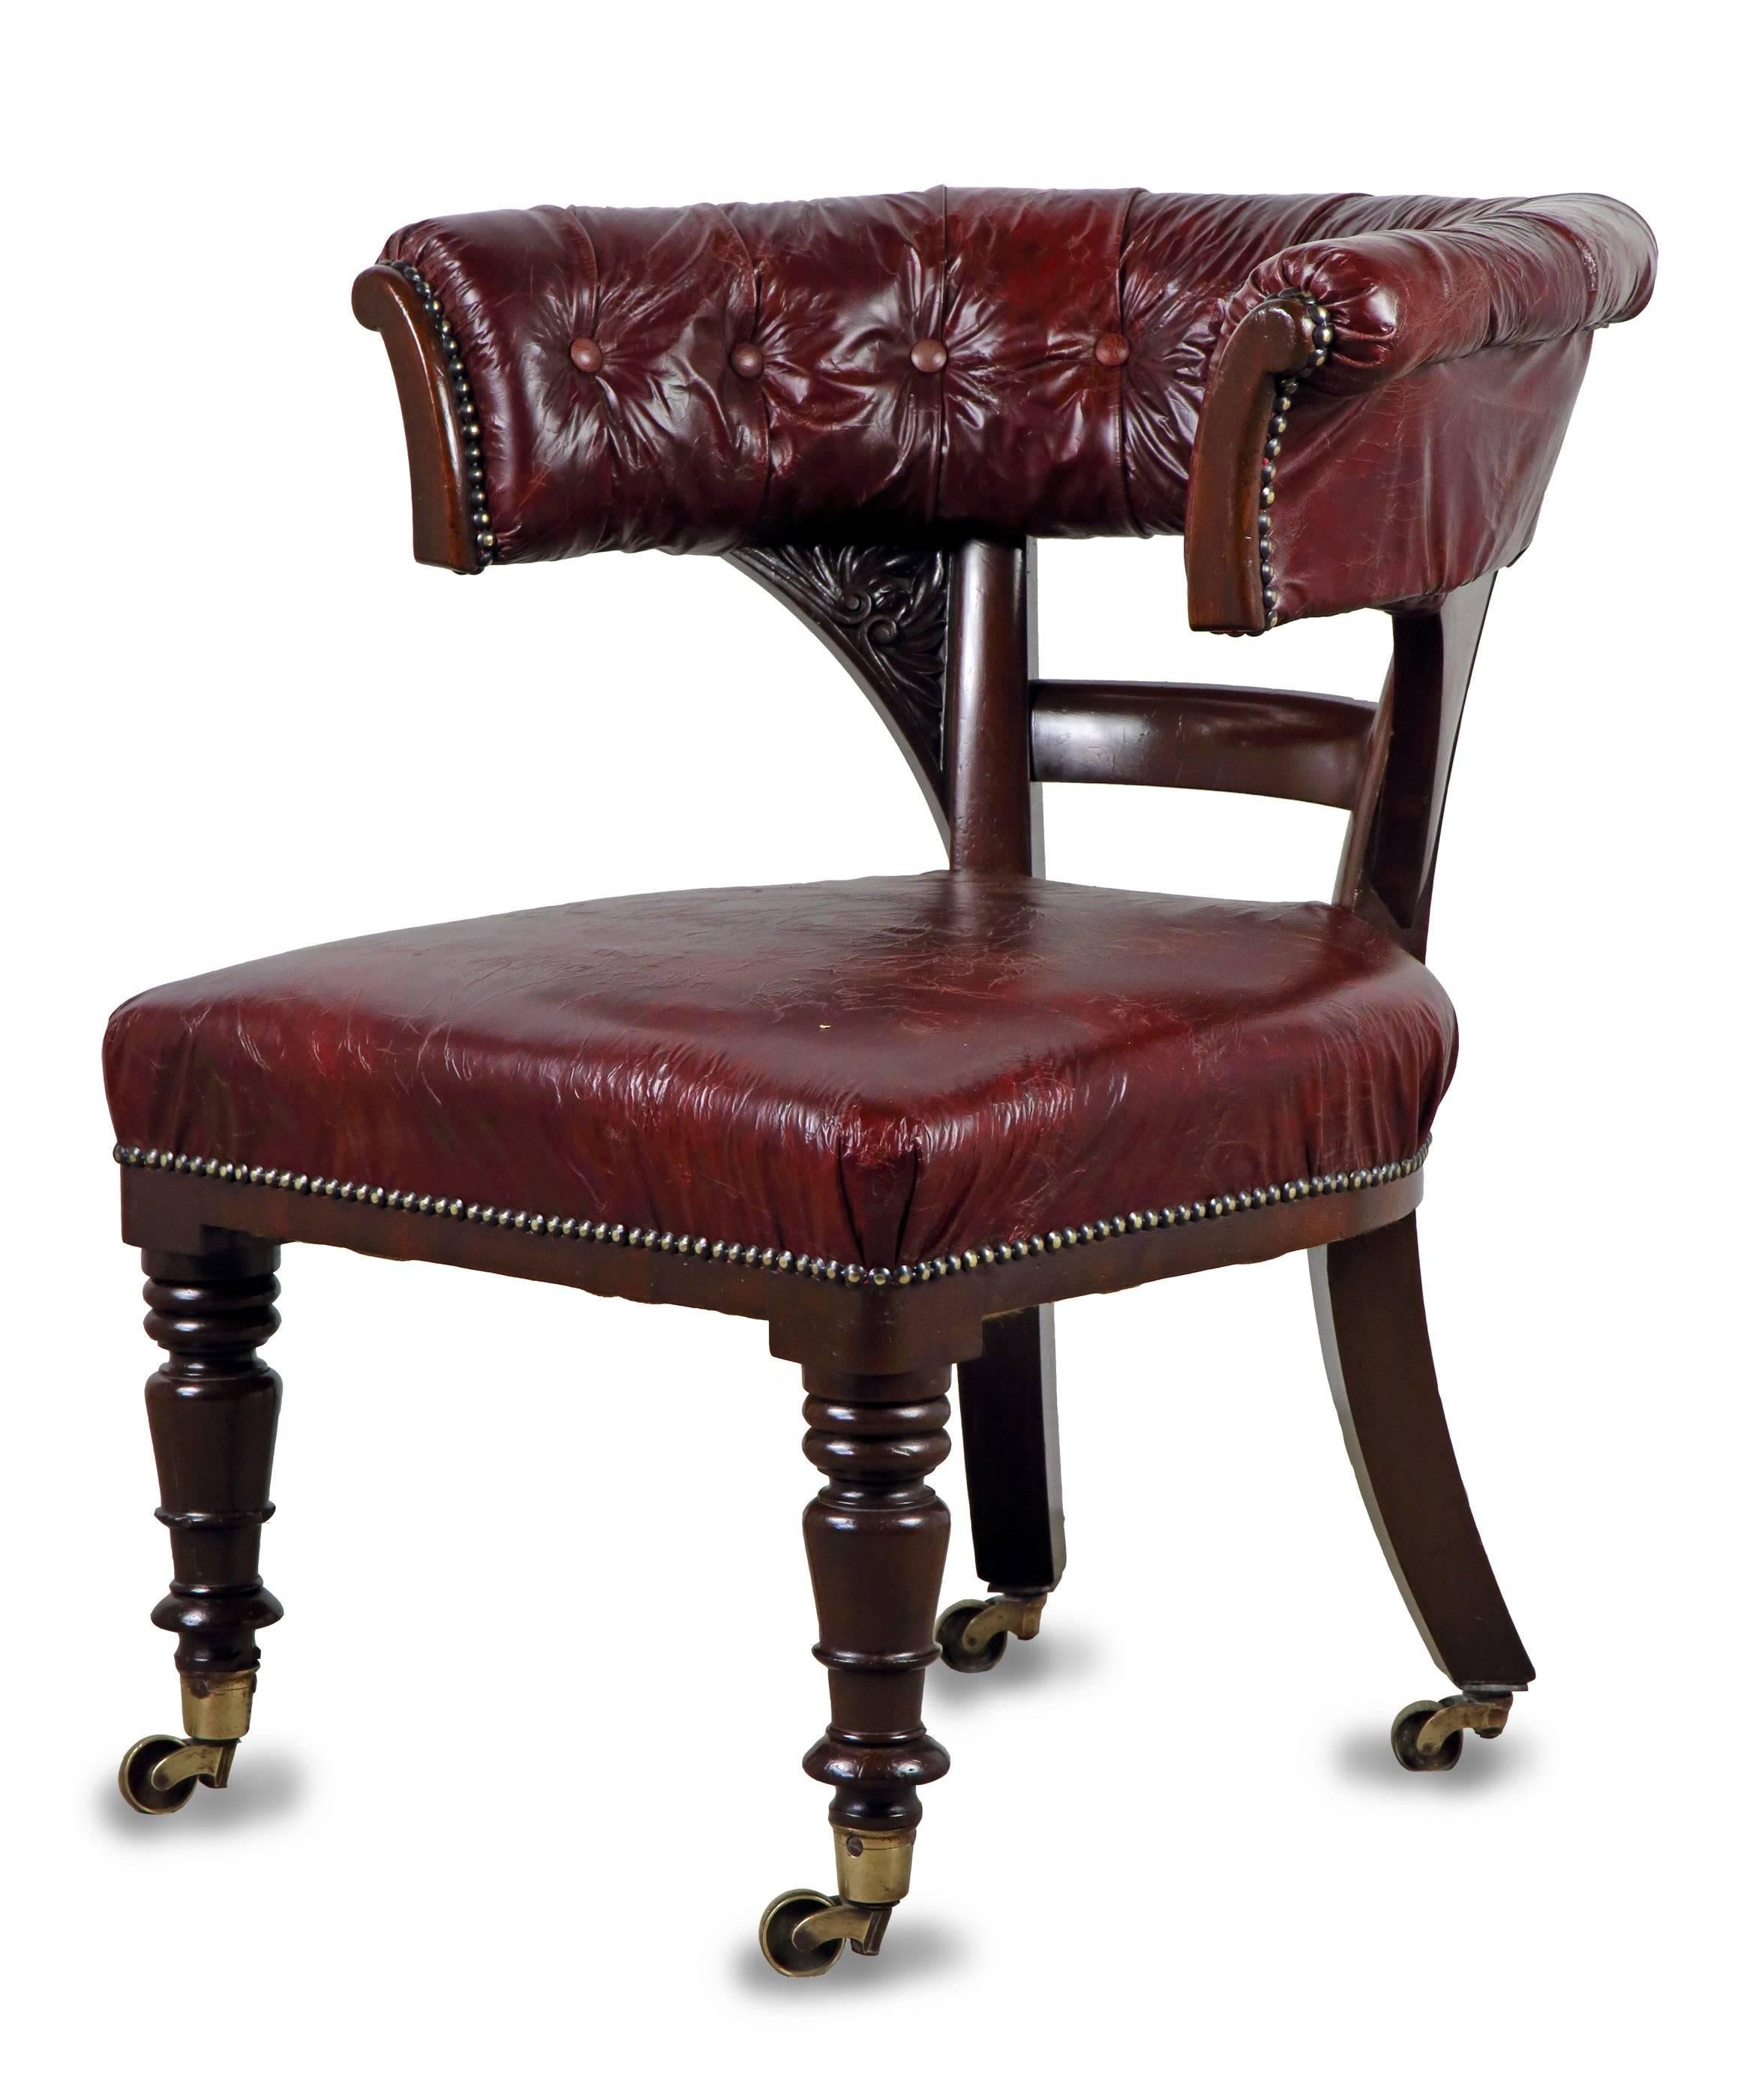 Mahogany and Leather Upholstered 'Horseshoe' Desk or Library Chair 1